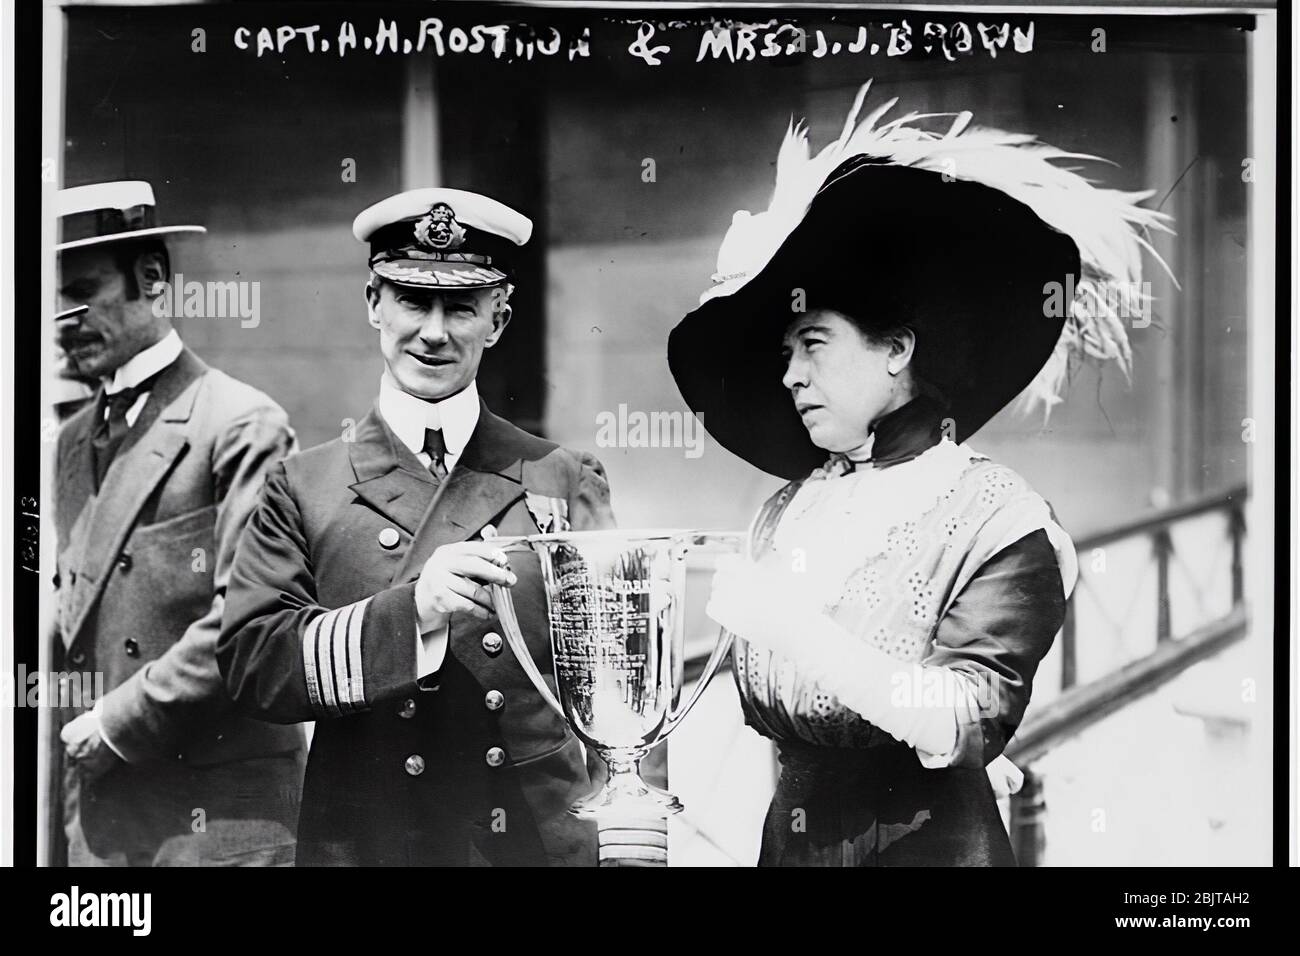 Mrs. J.J. Brown ('The Unsinkable Molly Brown') offering a prize mug award to Carpathia Captain Arthur Henry Roston for his solution in the rescue of the Titanic. Stock Photo